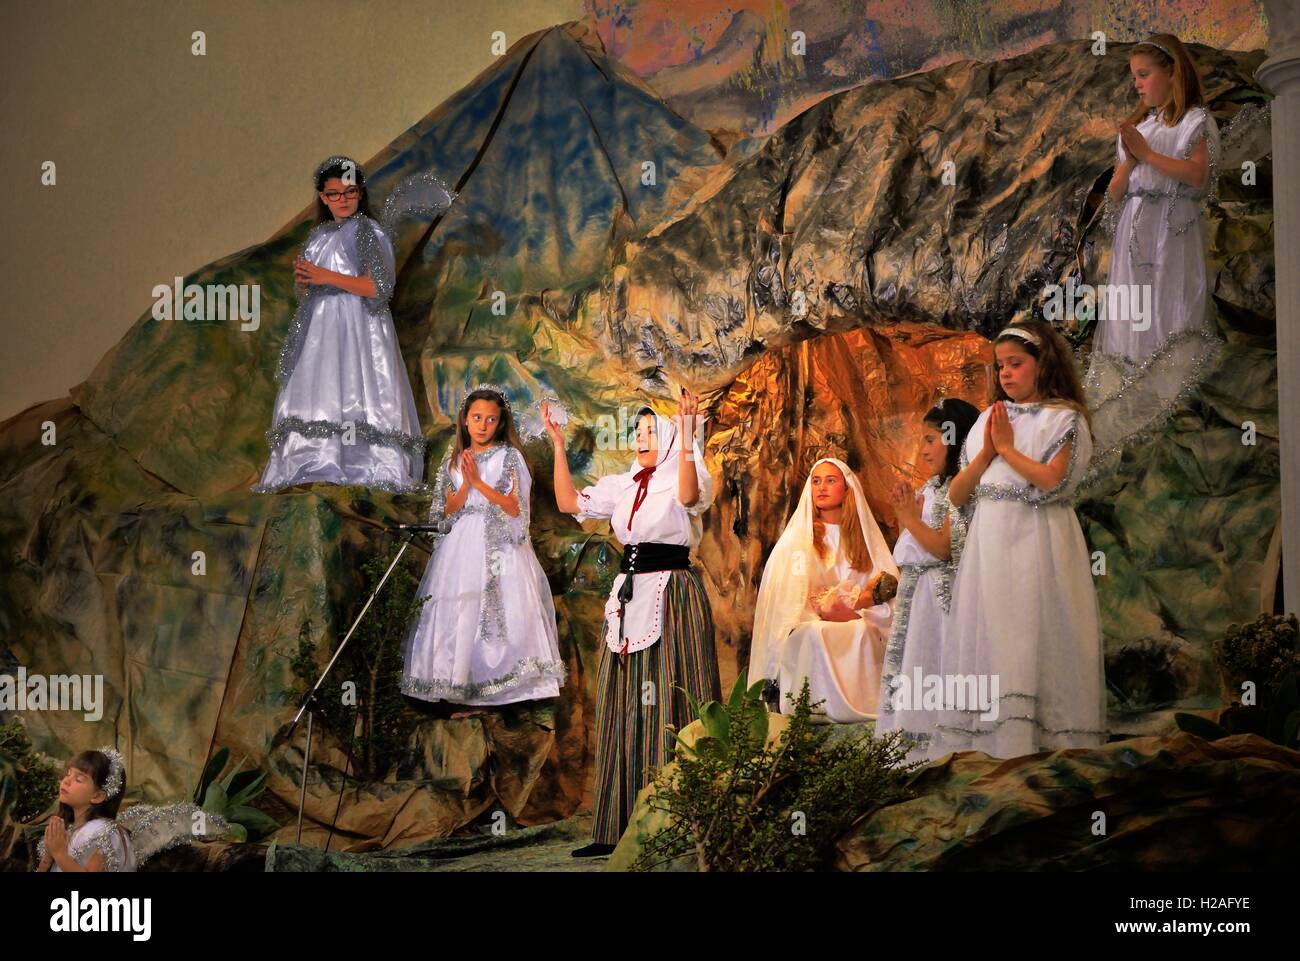 Teguise, Lanzarote. Young village girls in traditional Christmas church nativity in the Iglesia de Nuestra Señora de Guadalupe Stock Photo